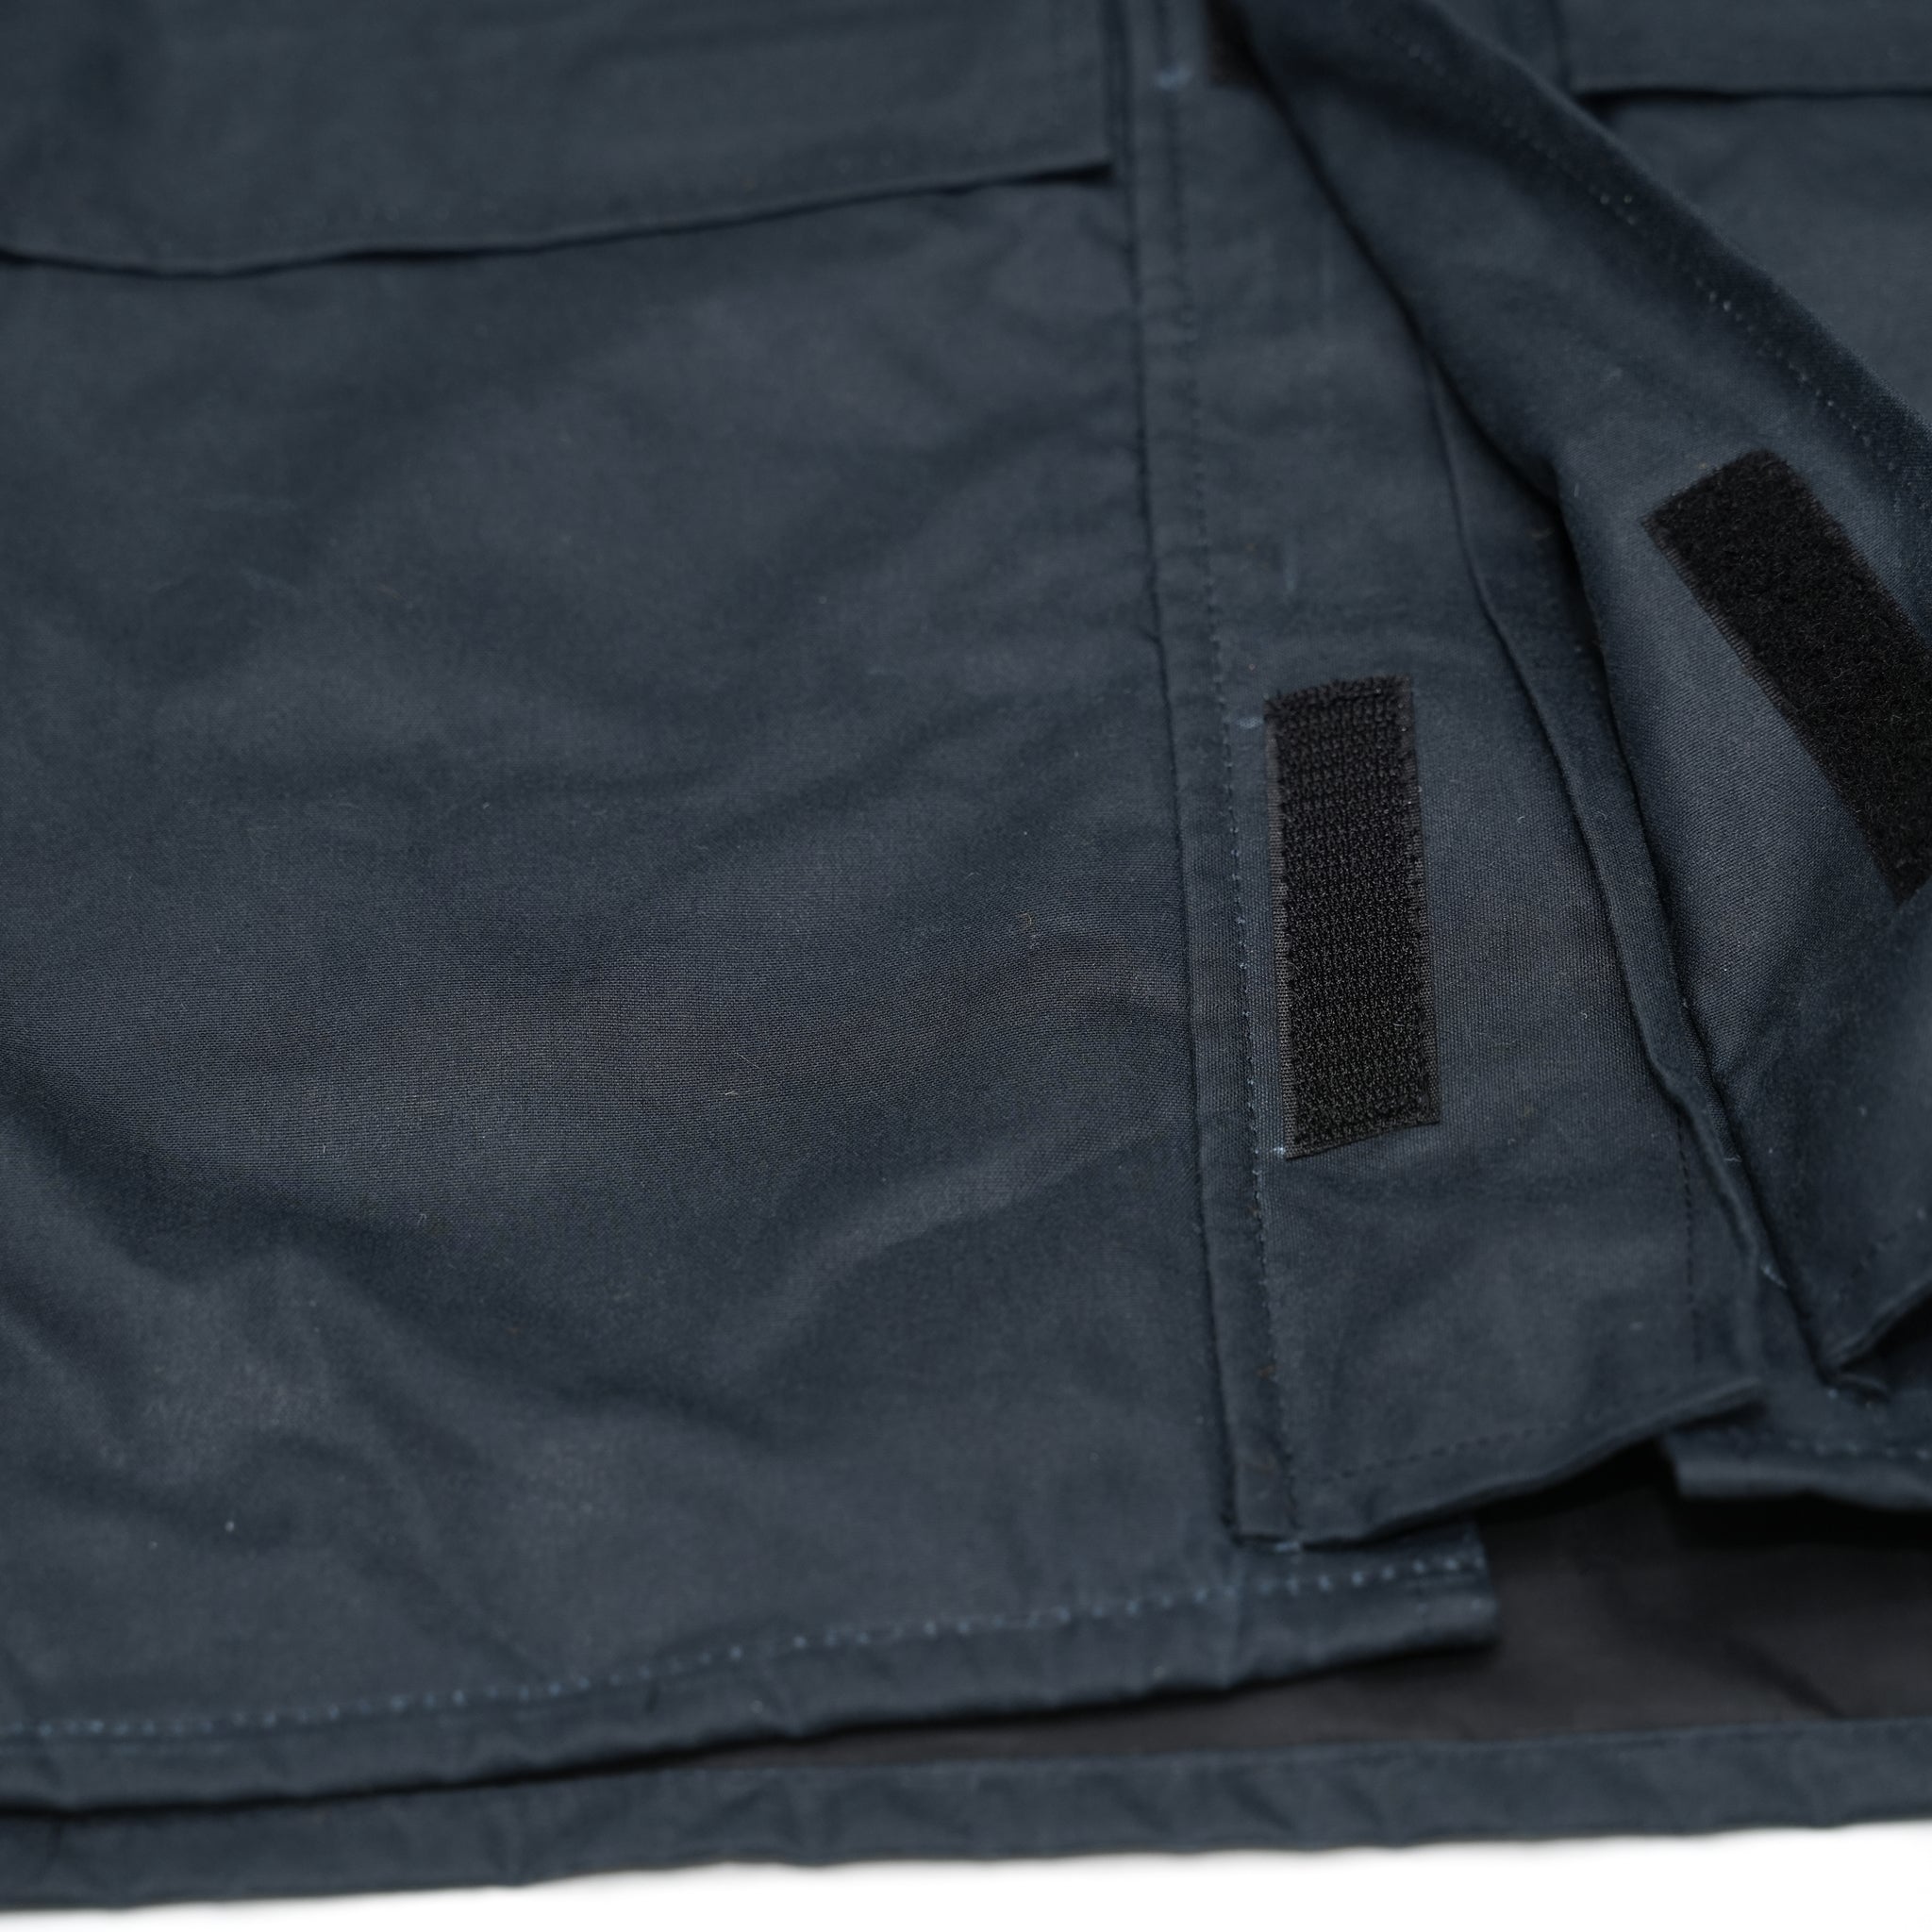 No:HFW22 FW02 | Name:Foul Jacket | Color:Black/Steal【H.F AND WEAVER_エイチ.エフ アンド ウィーバー】